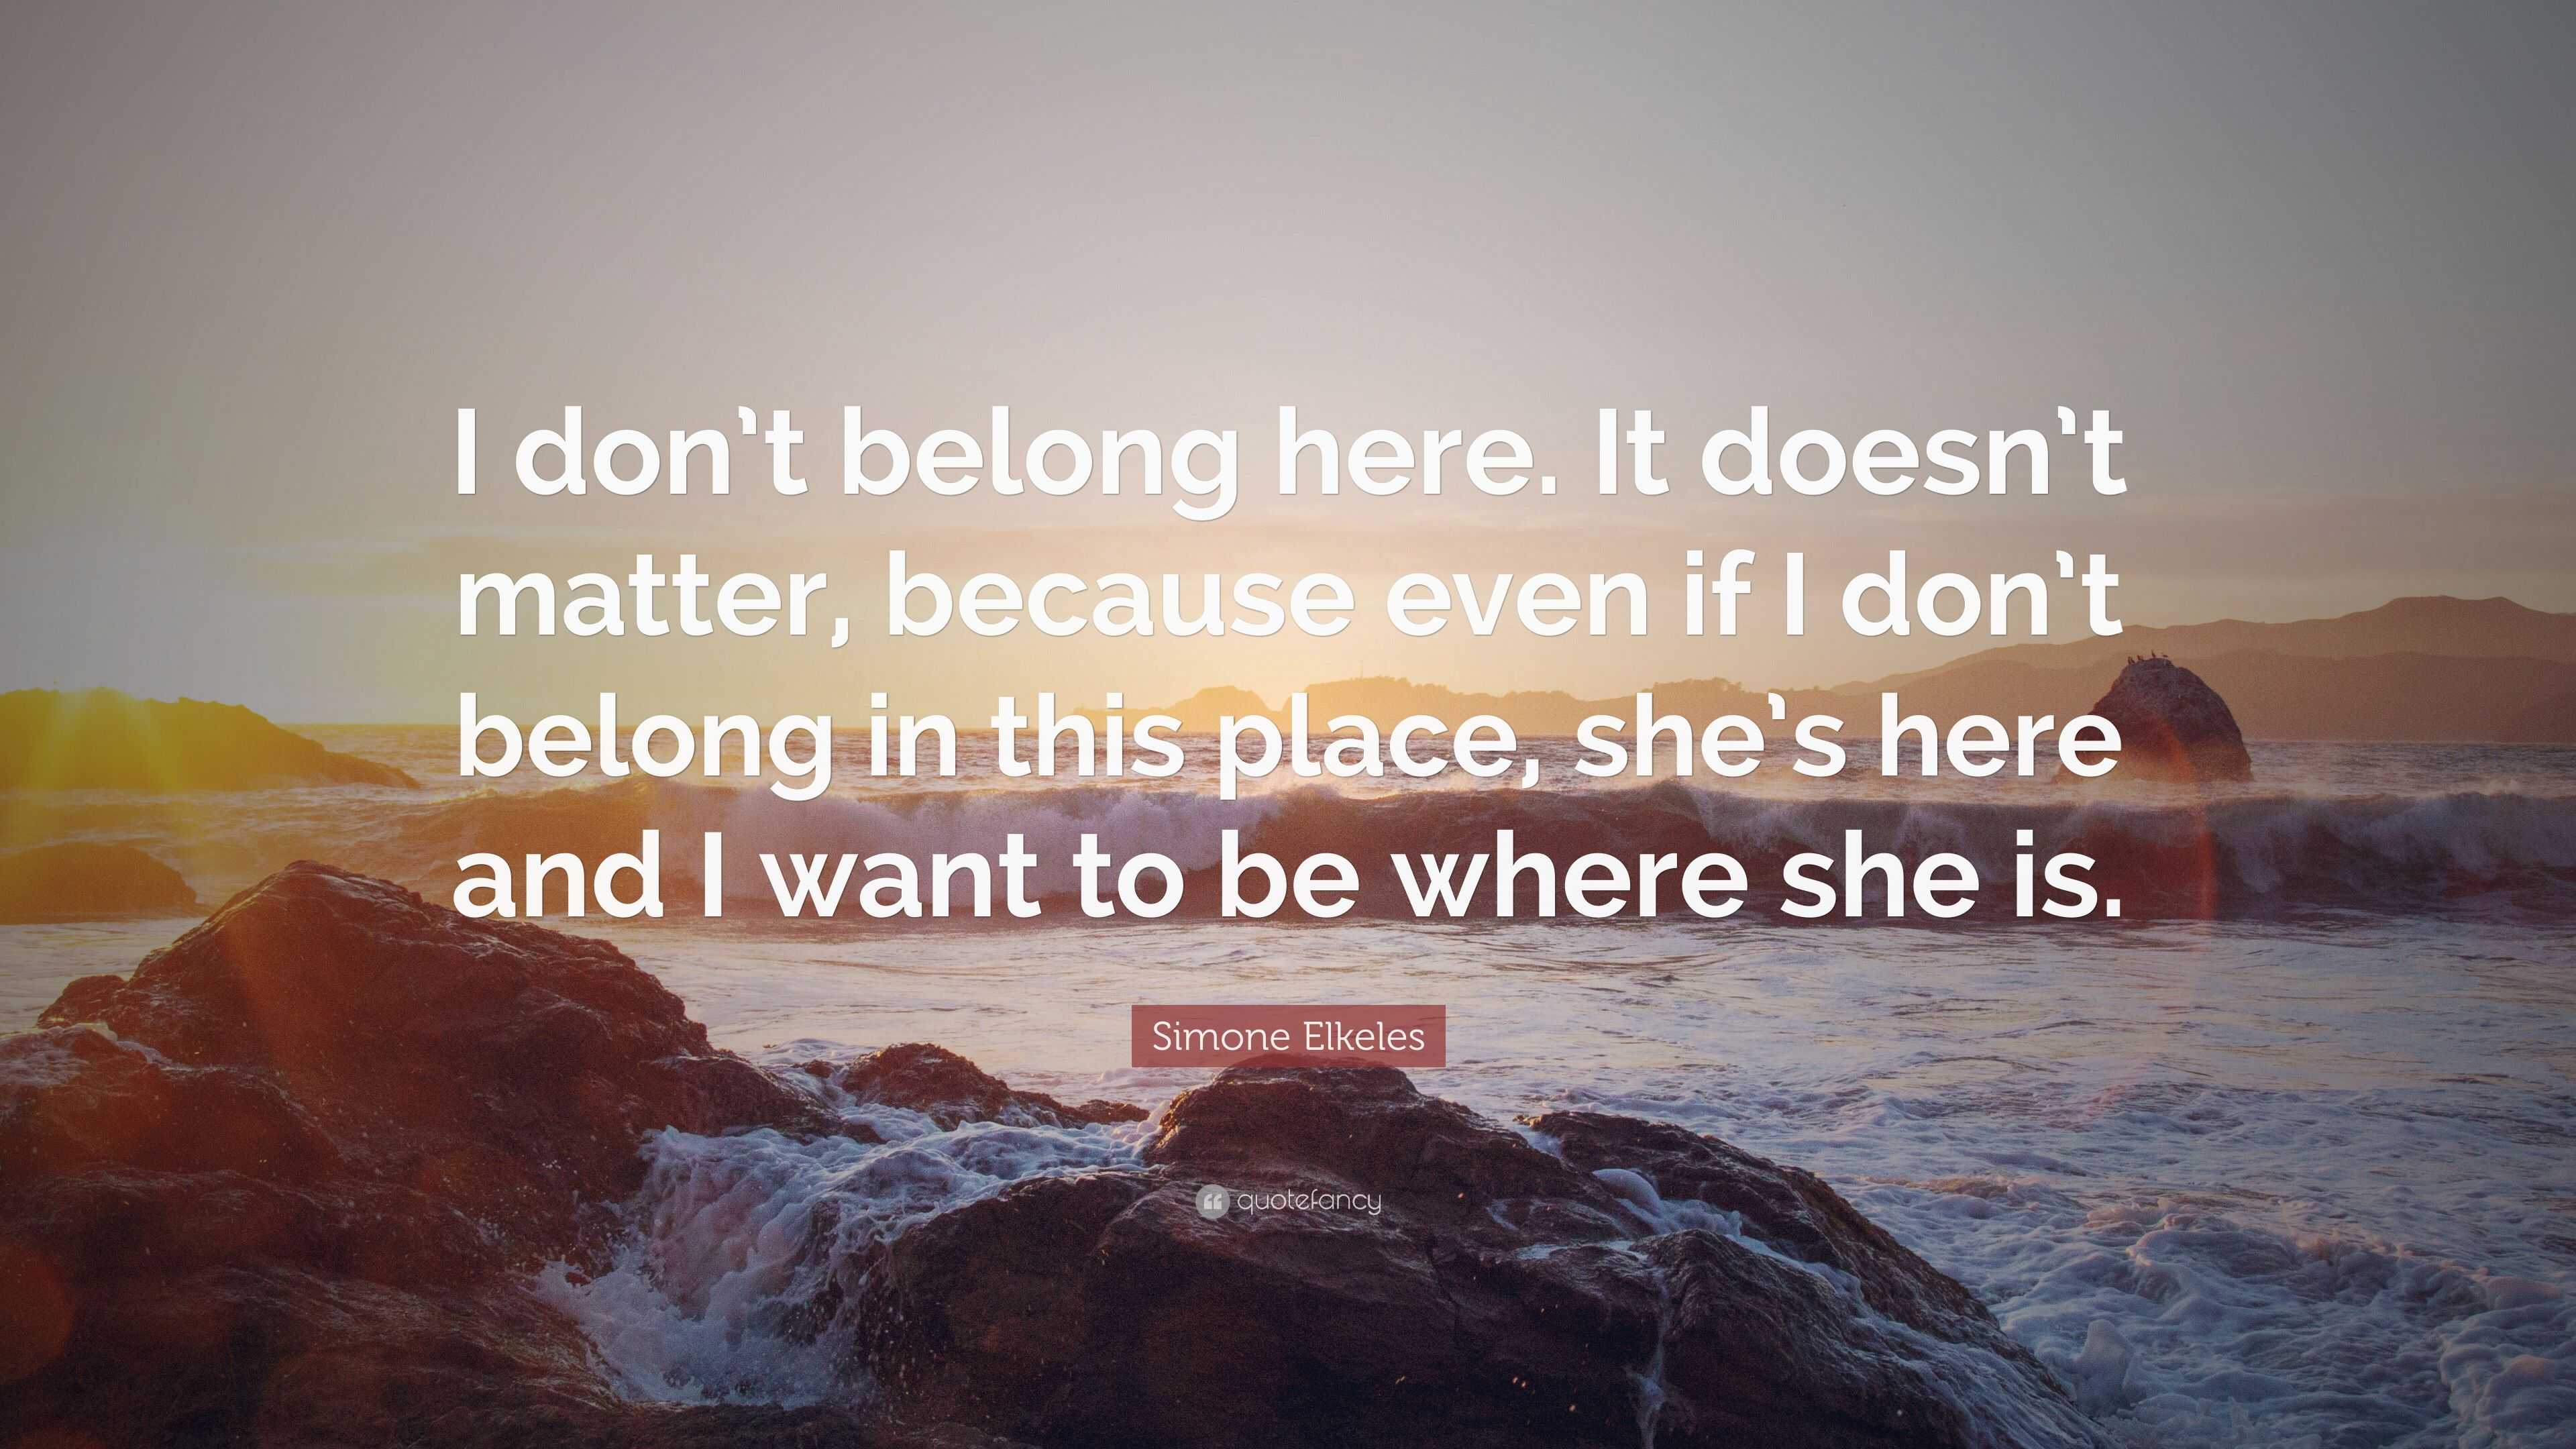 Simone Elkeles Quote: “I don’t belong here. It doesn’t matter, because ...